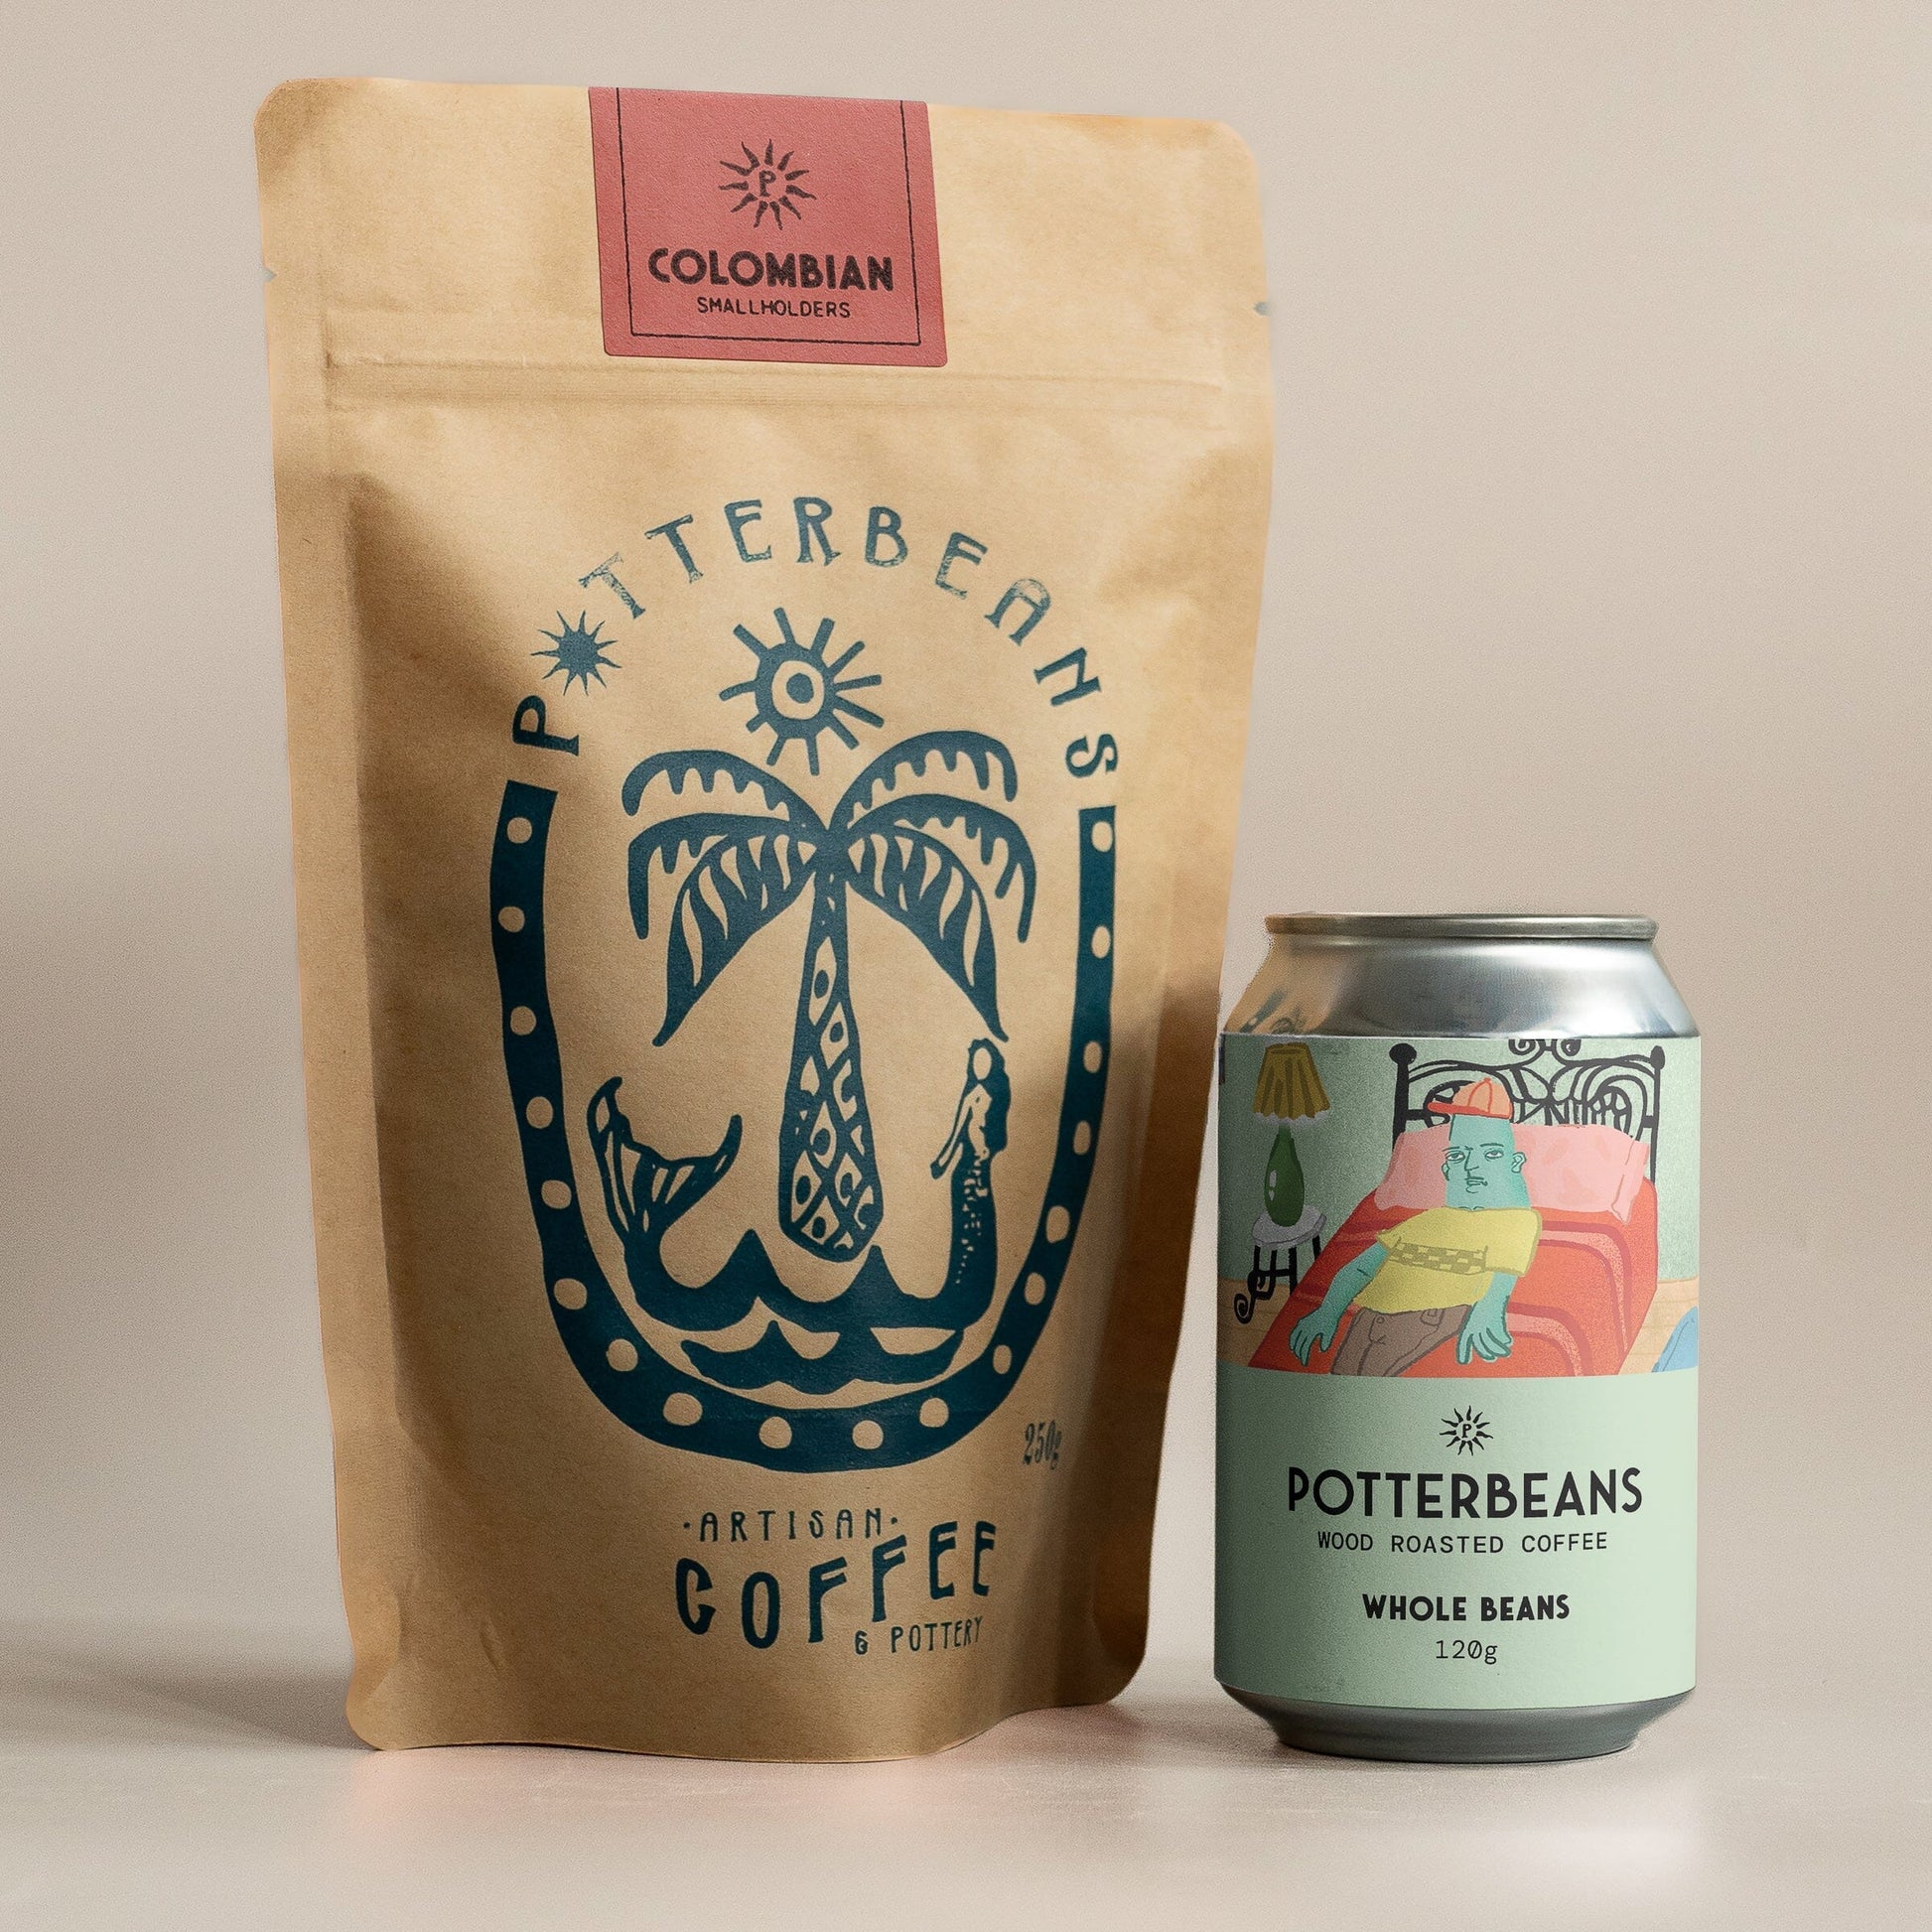 Colombian smallholders is a speciality coffee from Colombia, renowned for its great sweetness and fruity acidity